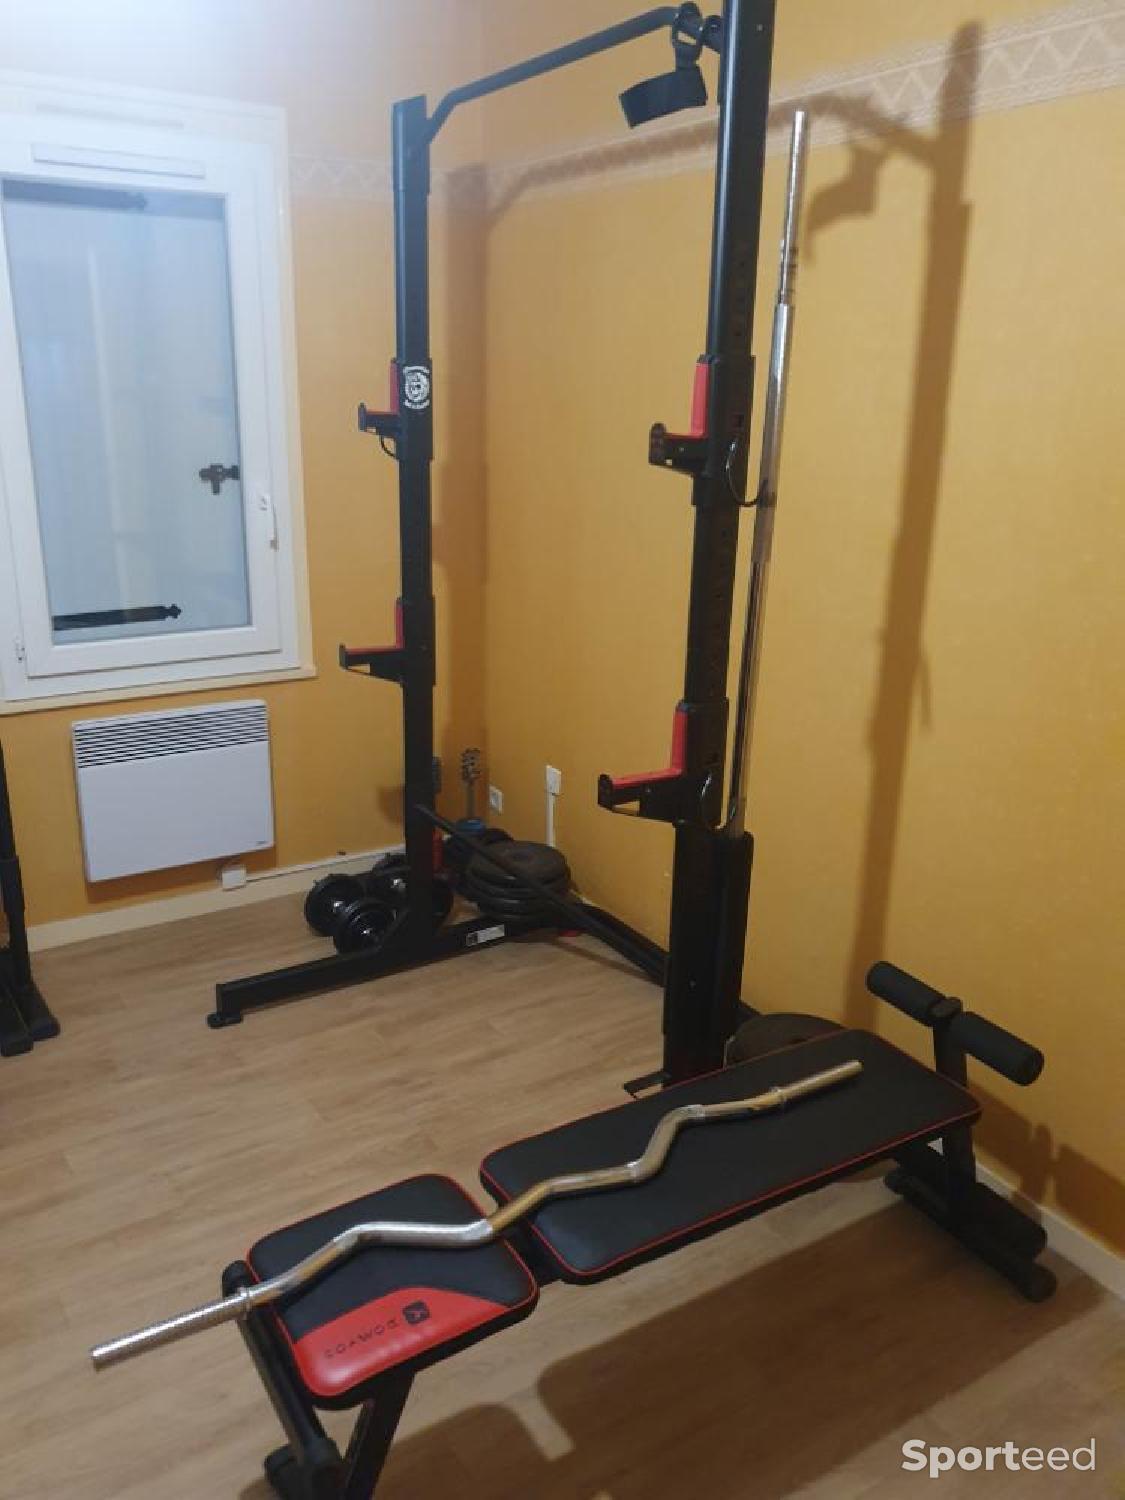 Banc de musculation d'occasion : Equipements  Fitness / Cardio training -  11/05/2023 - Sporteed